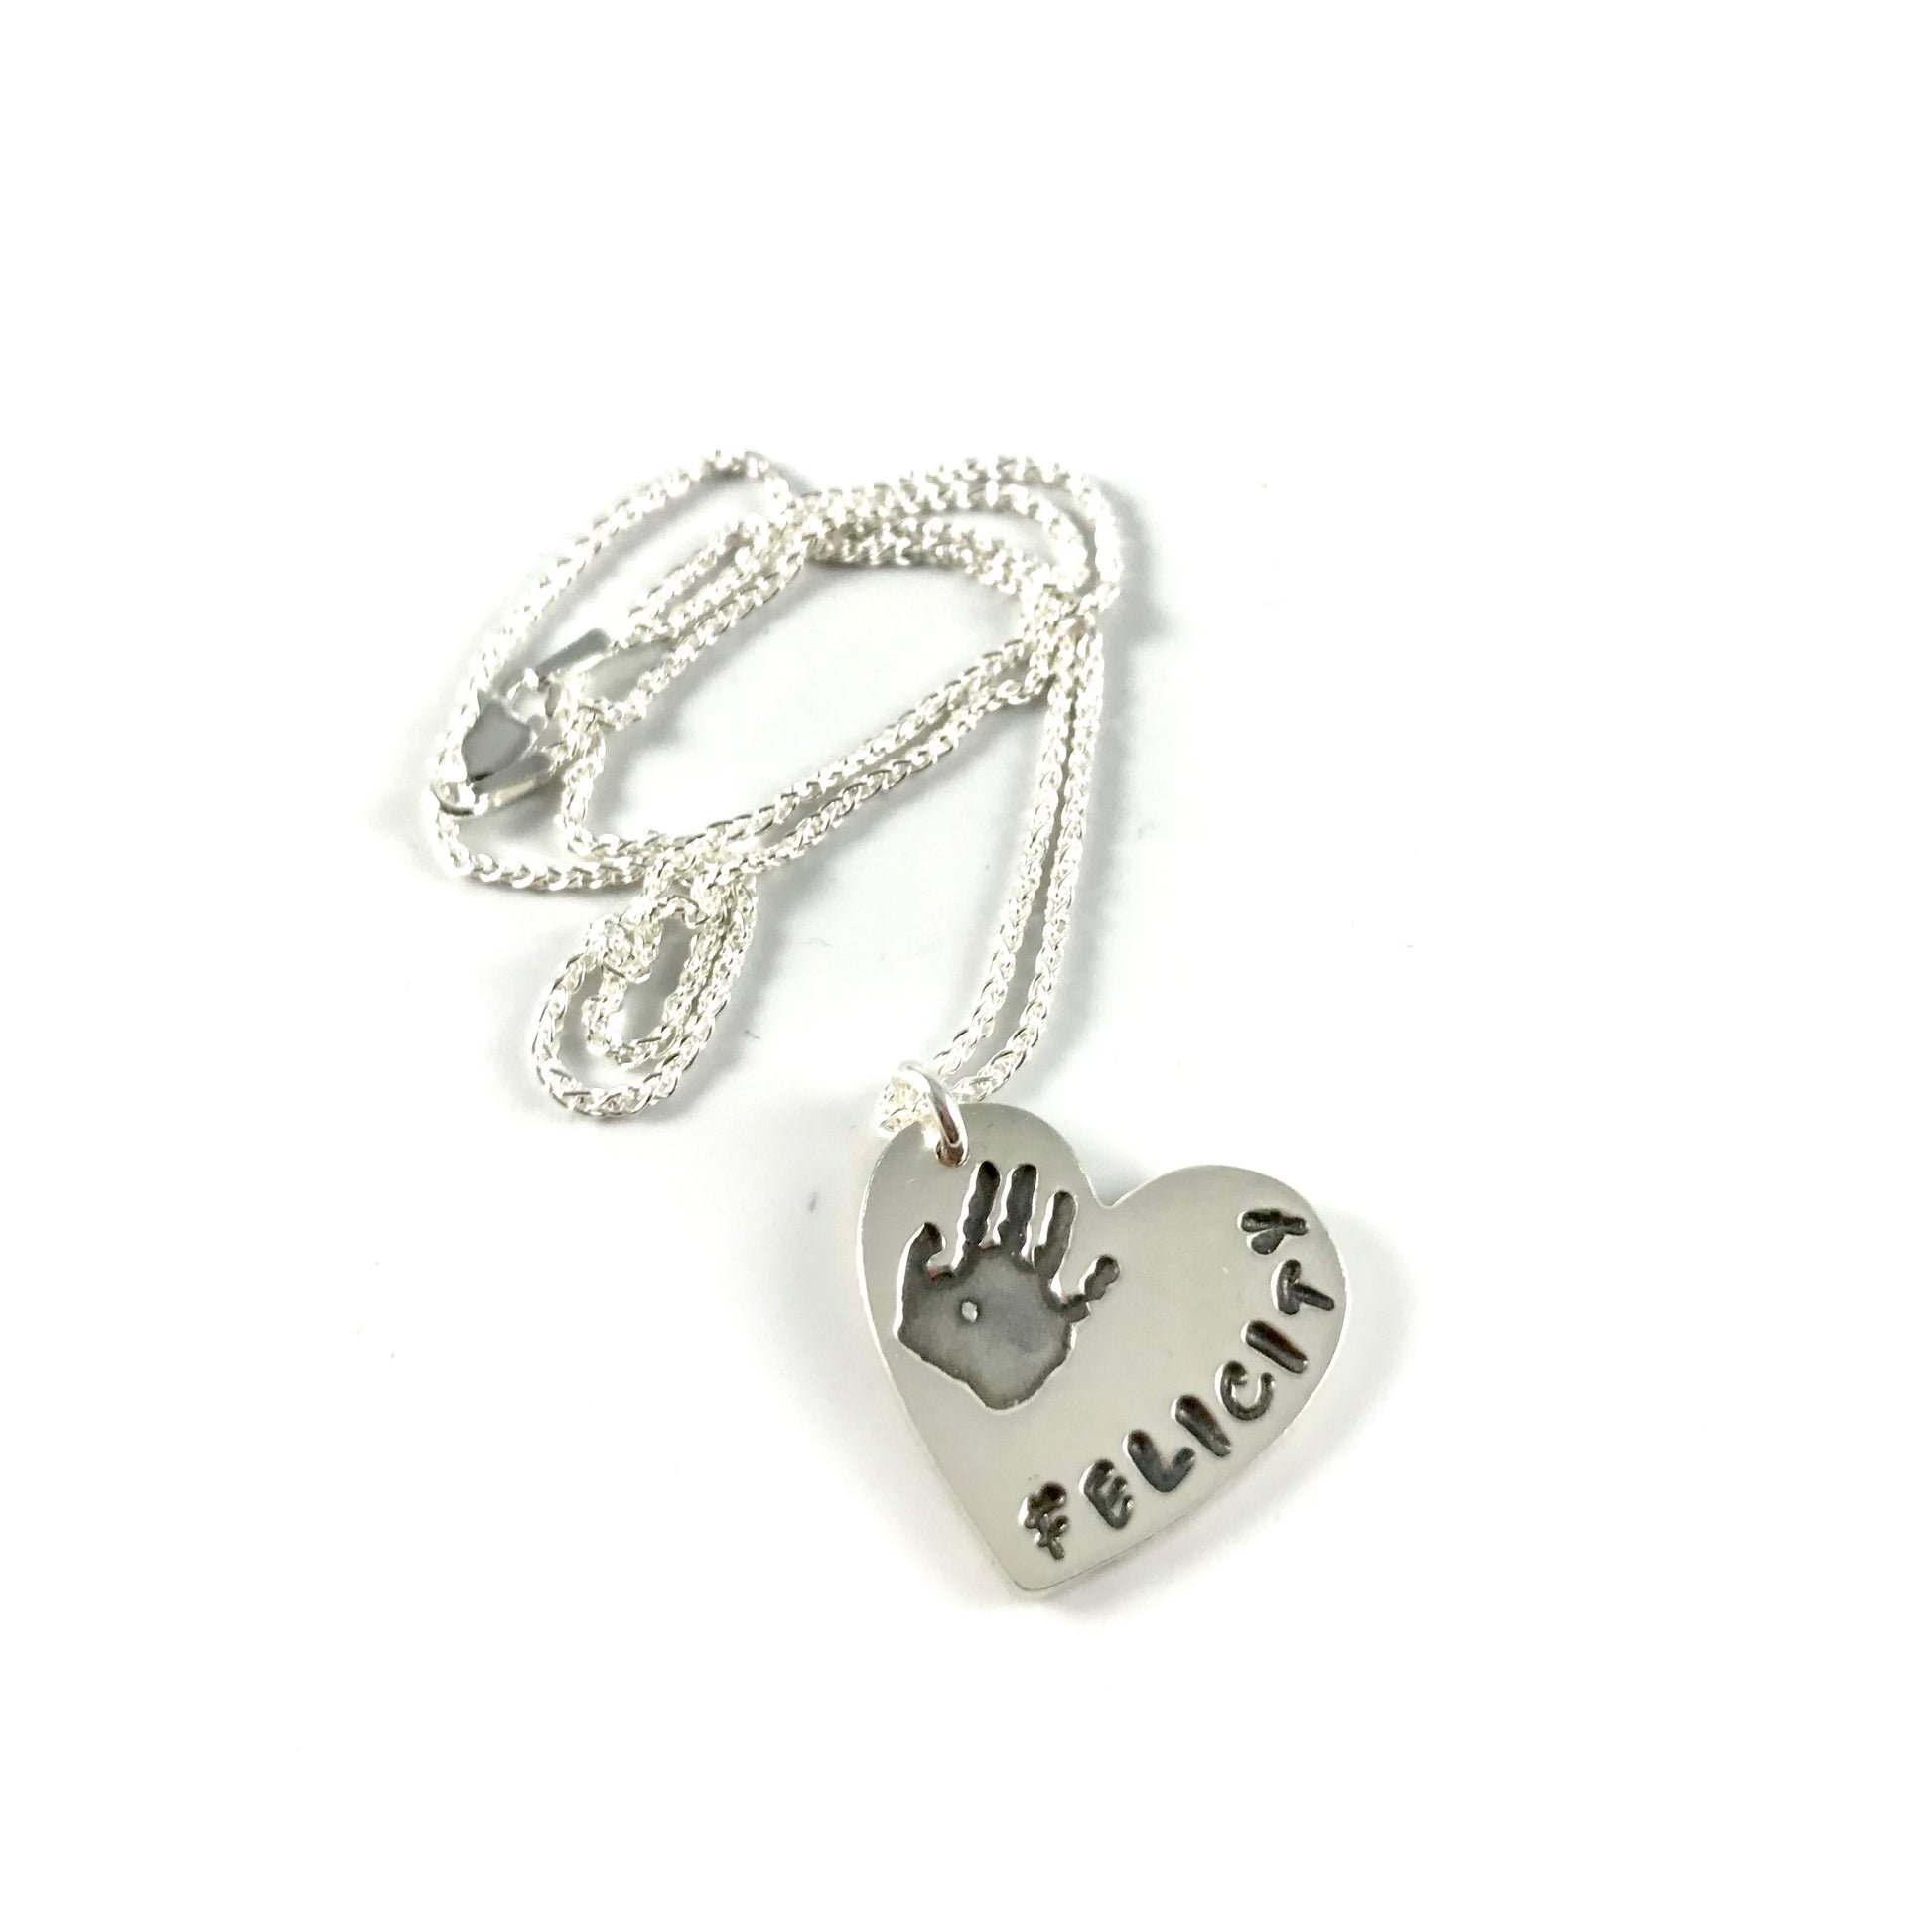 Small Hand or Footprint Necklace with 1 Print